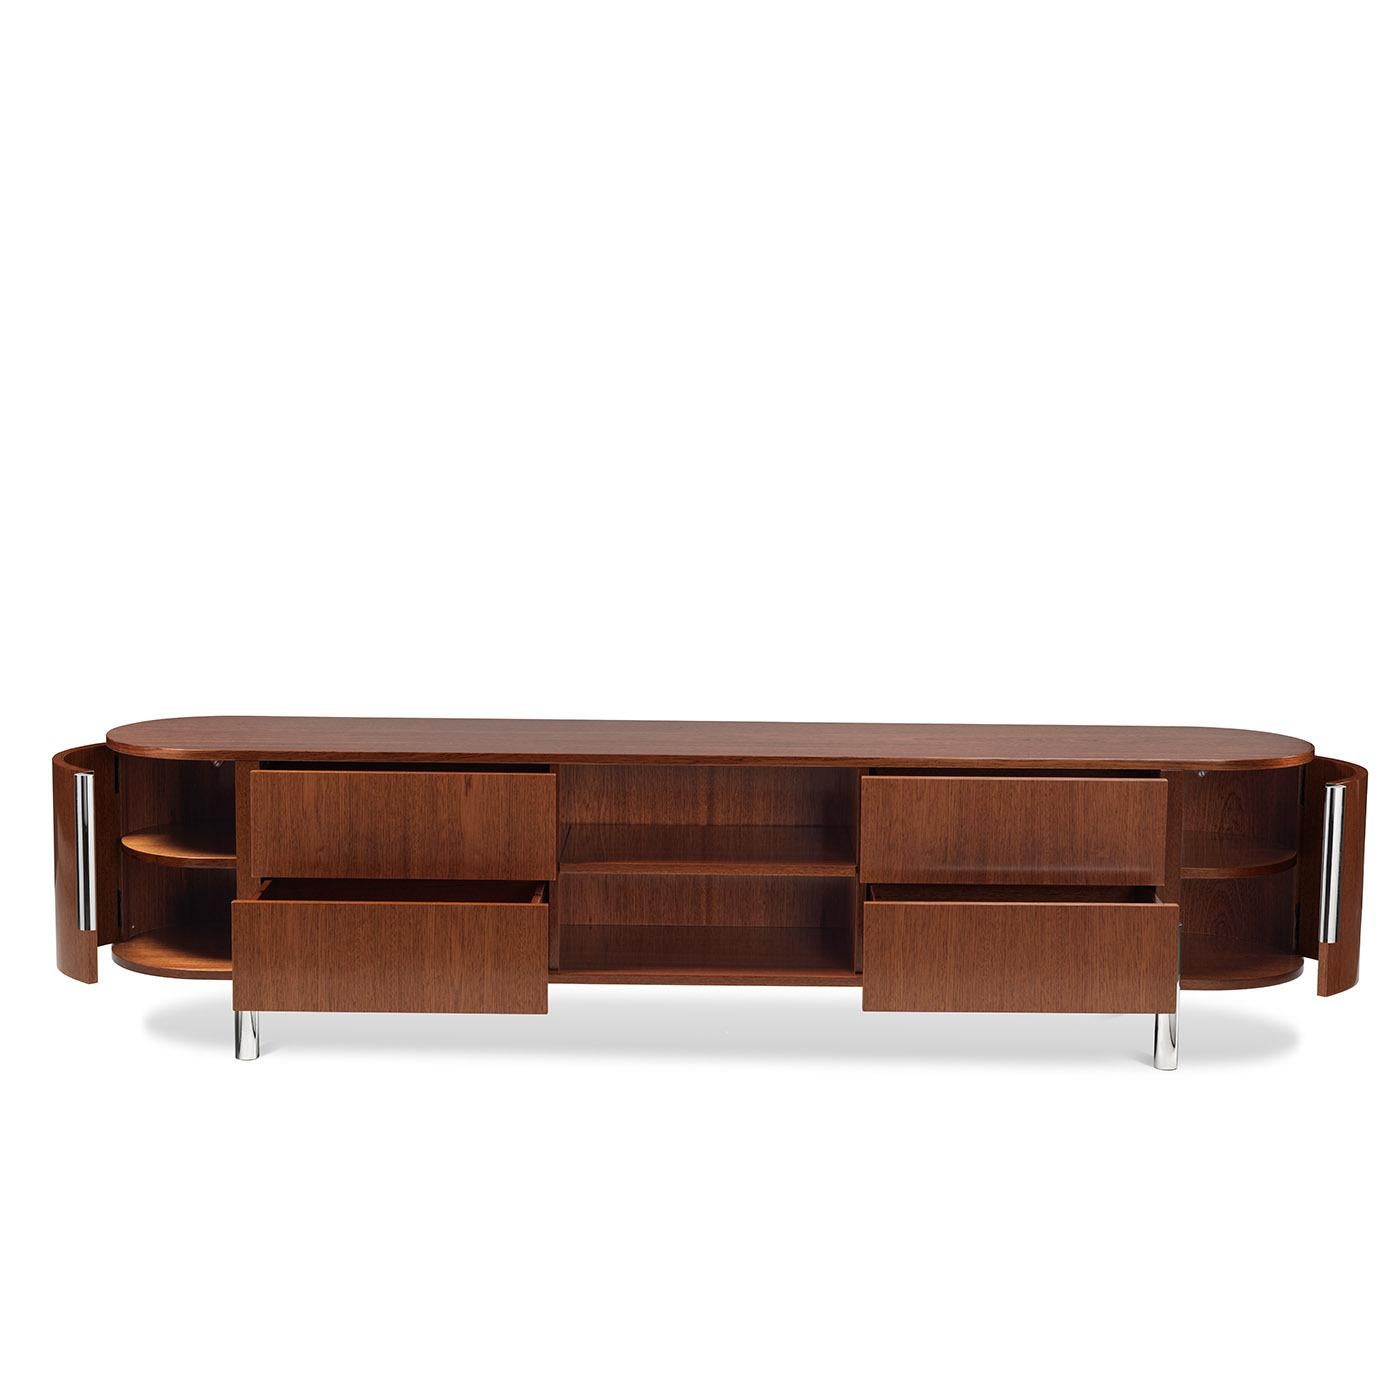 A design Lorenza Bozzoli conceived to enrich sophisticated modern living rooms for many years to come, this sideboard stands out for the intensely curved sides and glistening chrome-finished metal elements that extend from the top to create sleek